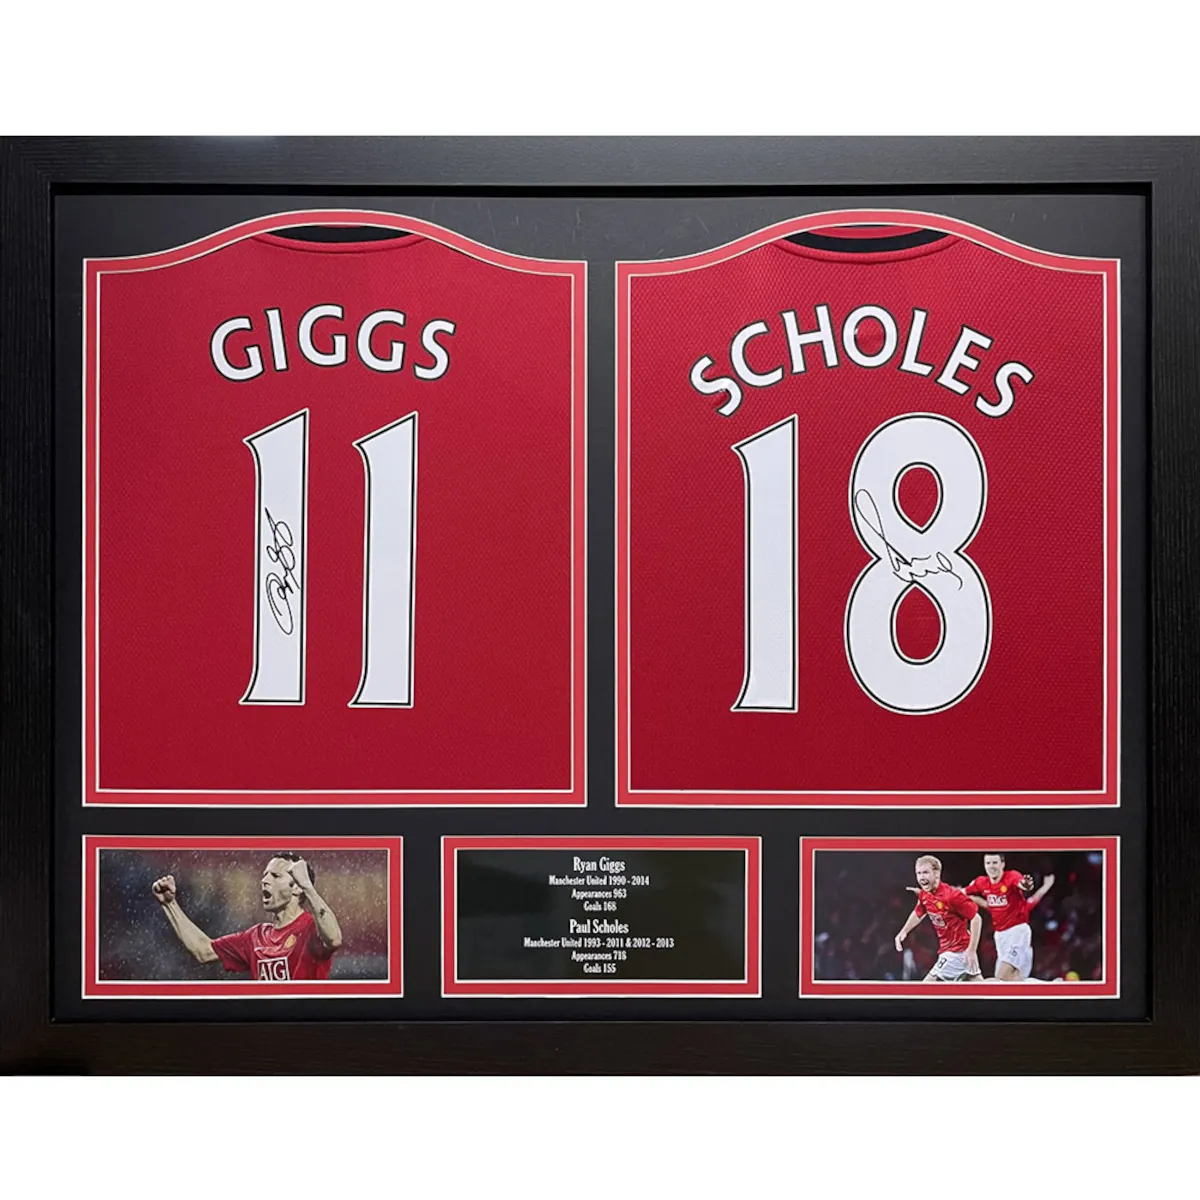 190057 Manchester United F.C. Giggs & Scholes Dual Framed Signed 2019-2020 Season Replica Football Shirts